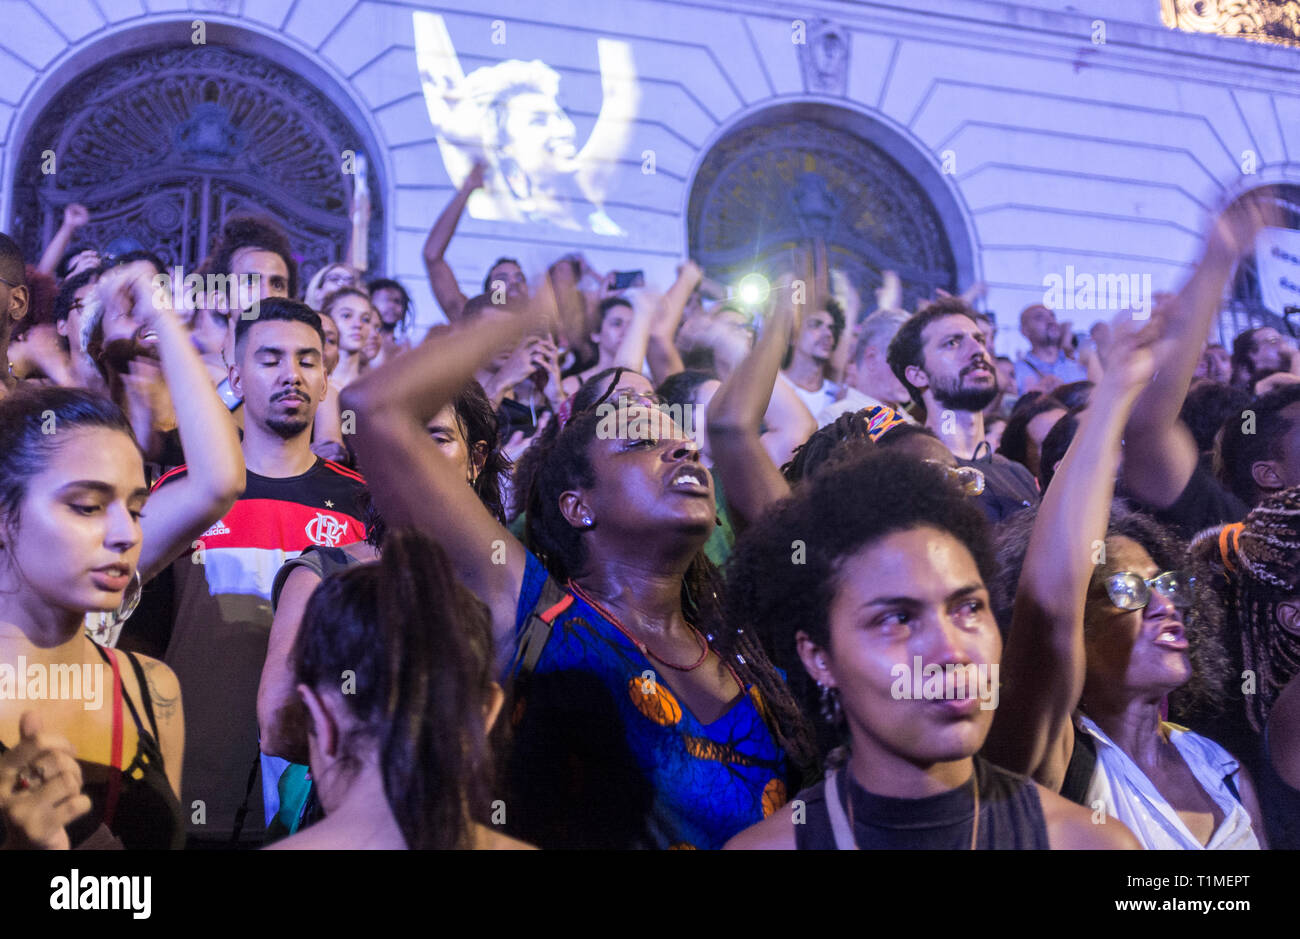 Demonstration for Marielle Franco, Brazilian feminist, politician and human rights activist, murdered on 14 March 2018 in Rio de Janeiro -  she had been an outspoken critic of police brutality and extrajudicial killings. Protestors get emotional, downtown Rio de Janeiro, Brazil. Stock Photo